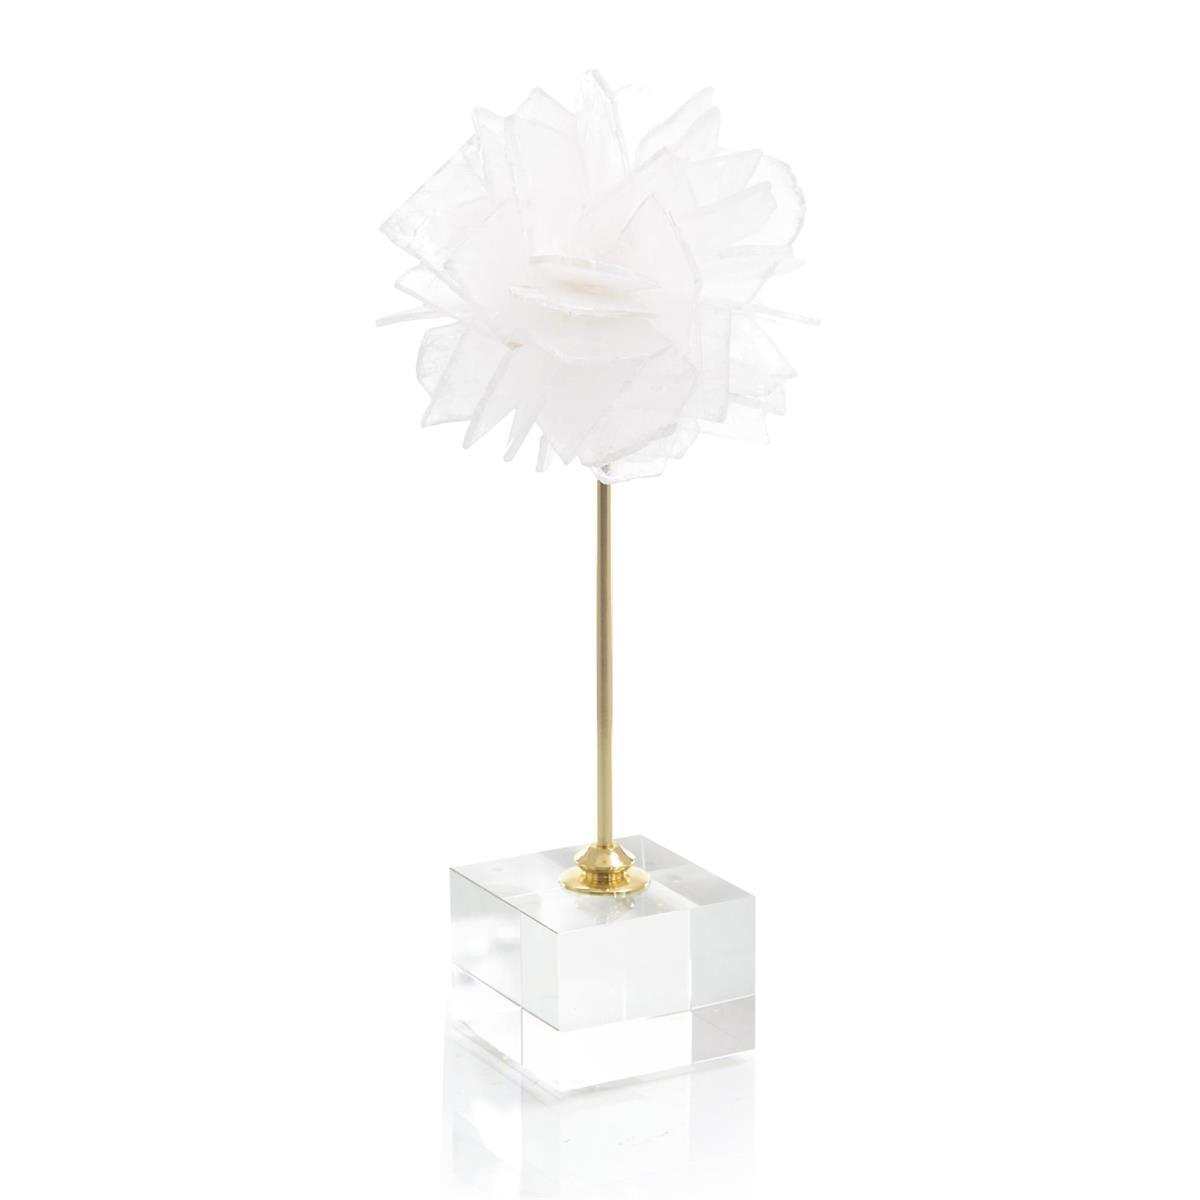 Floating Selenite Ball on Crystal Stand-John Richard-Sculptures & Objects-Artistic Elements